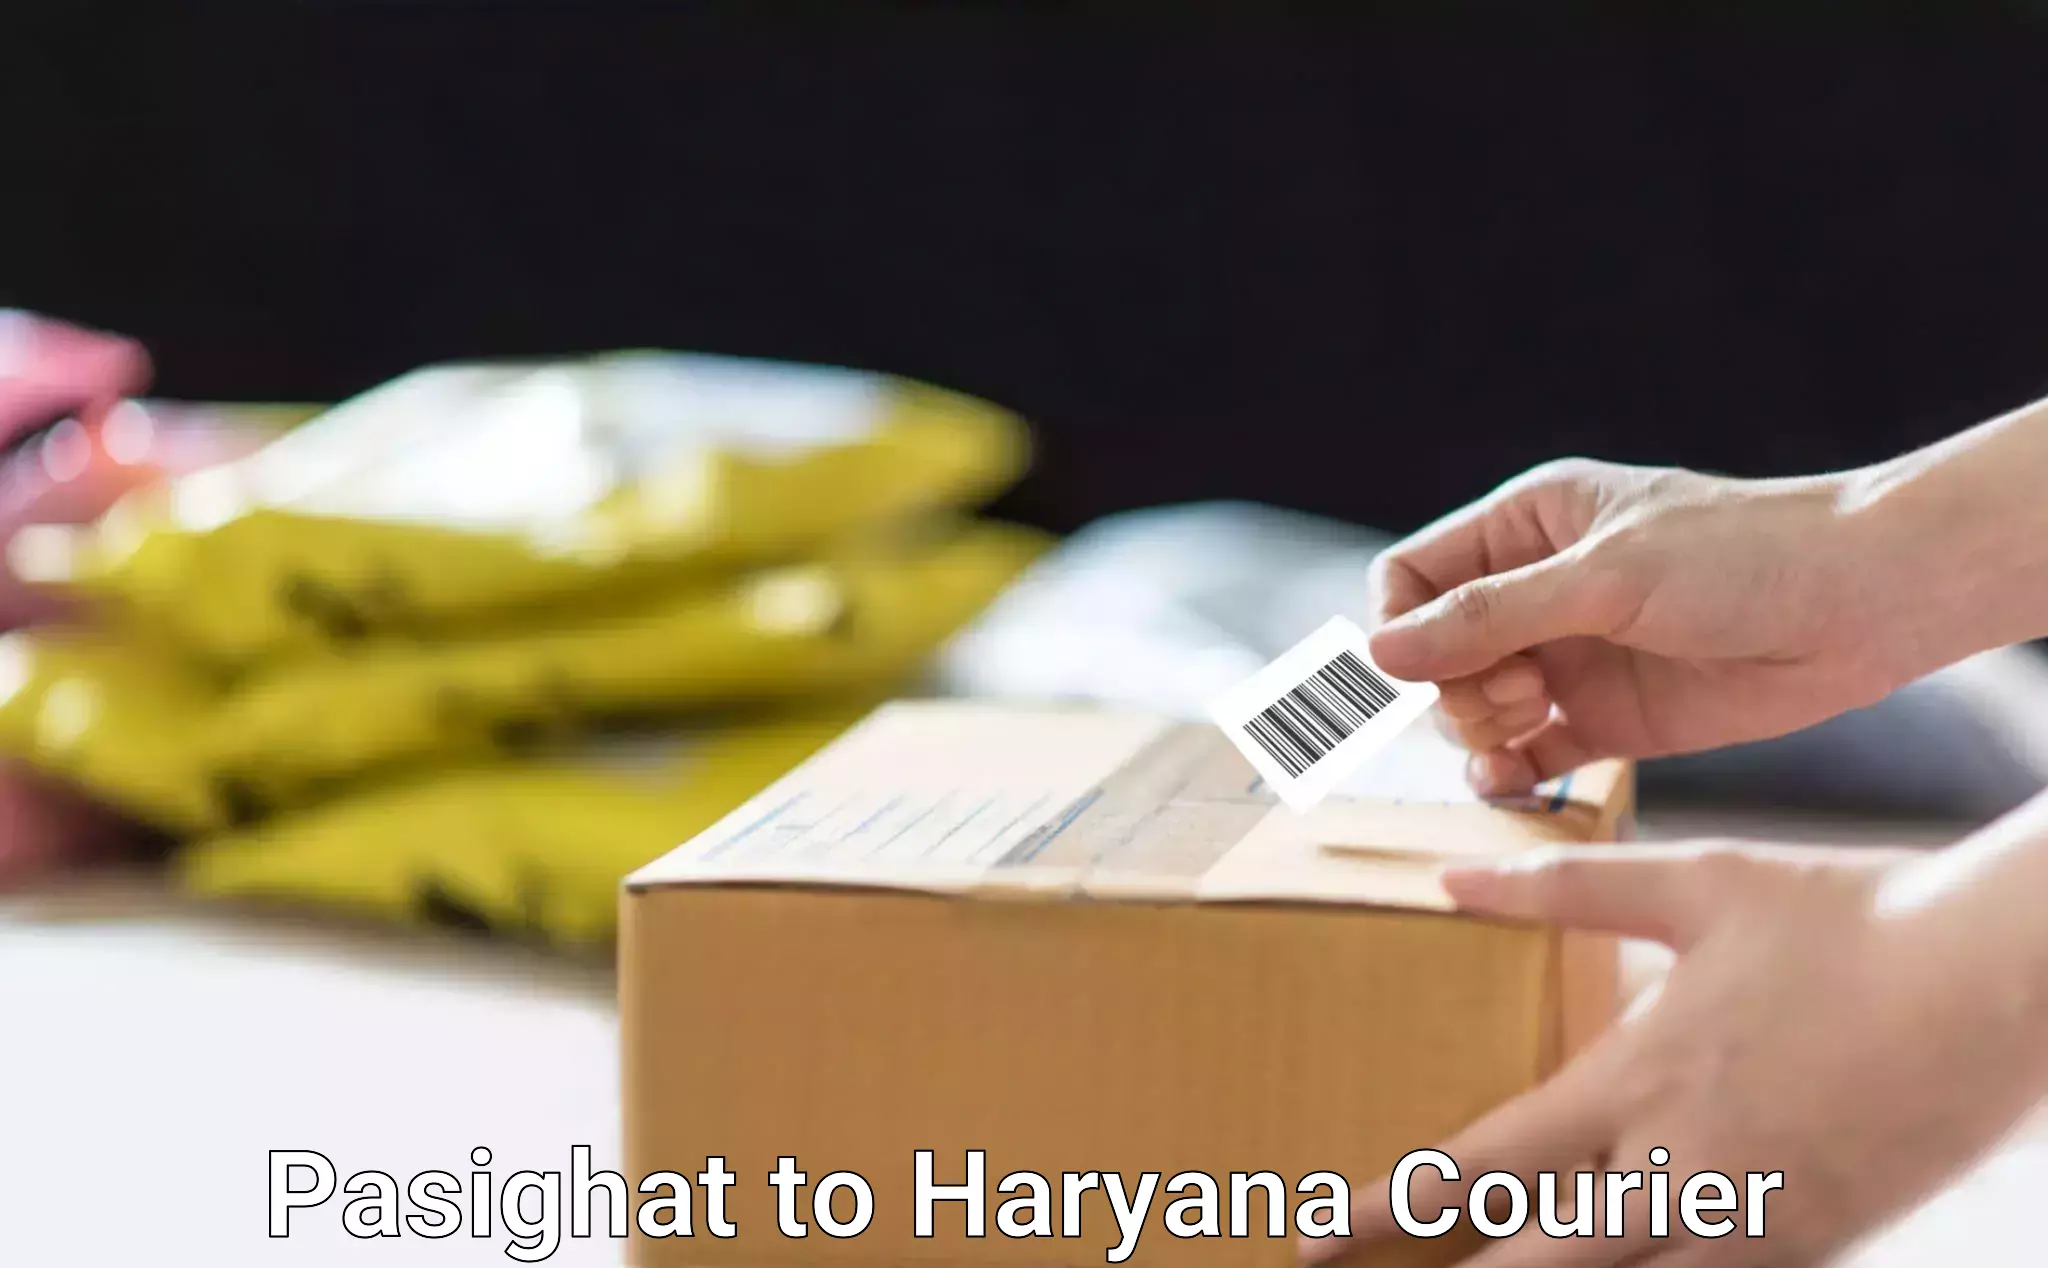 Same-day delivery solutions in Pasighat to Haryana